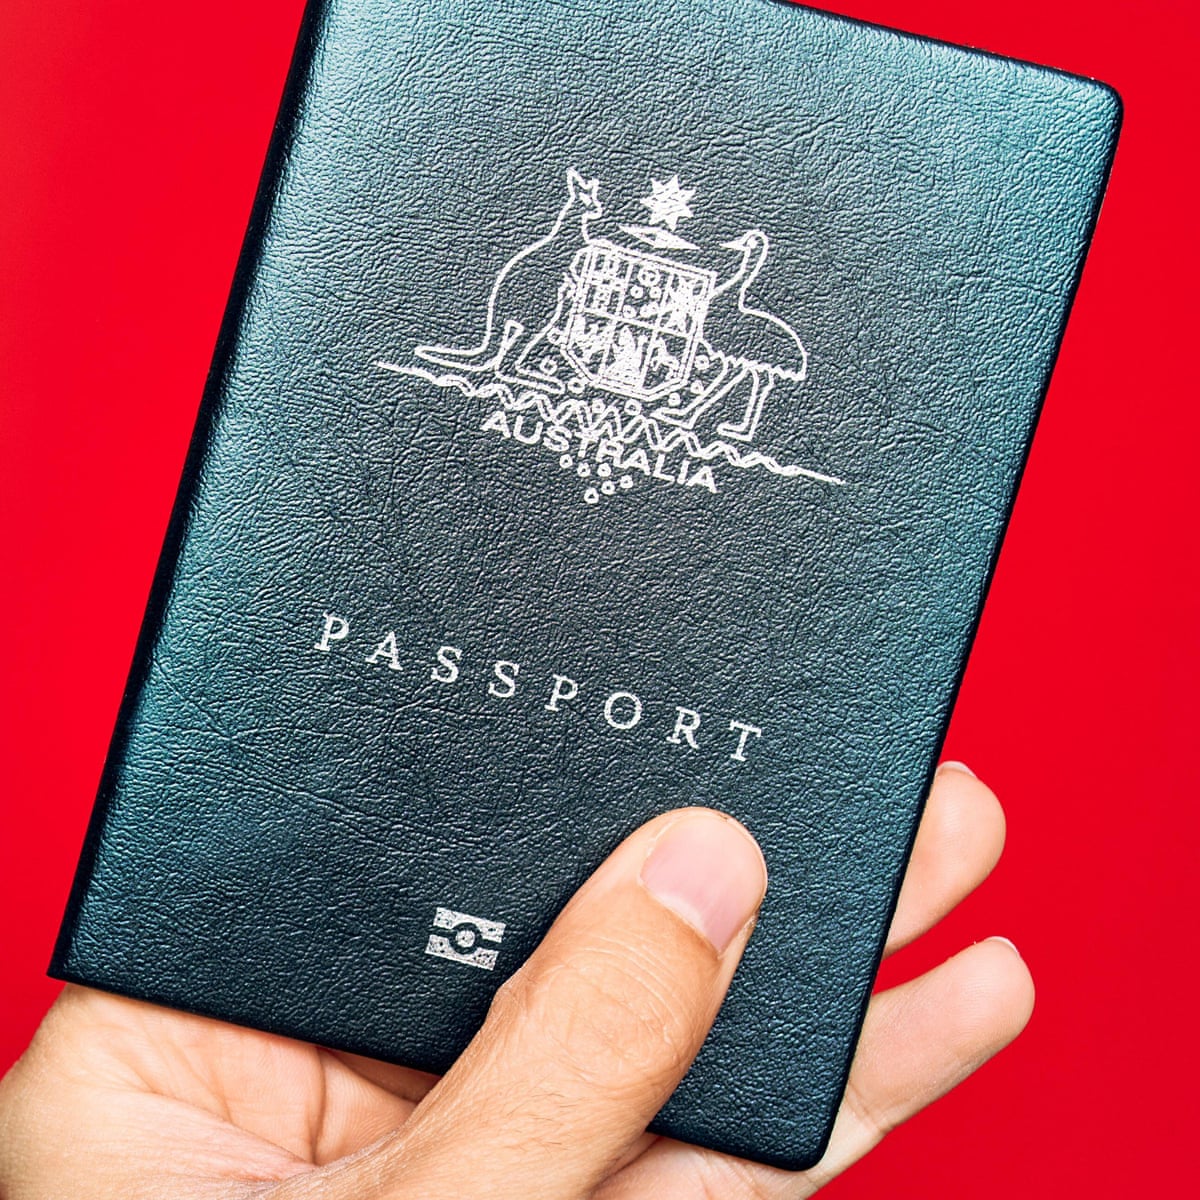 Unprecedented' delays at Australian passport office prompt fears of  cancelled travel plans | Australia news | The Guardian